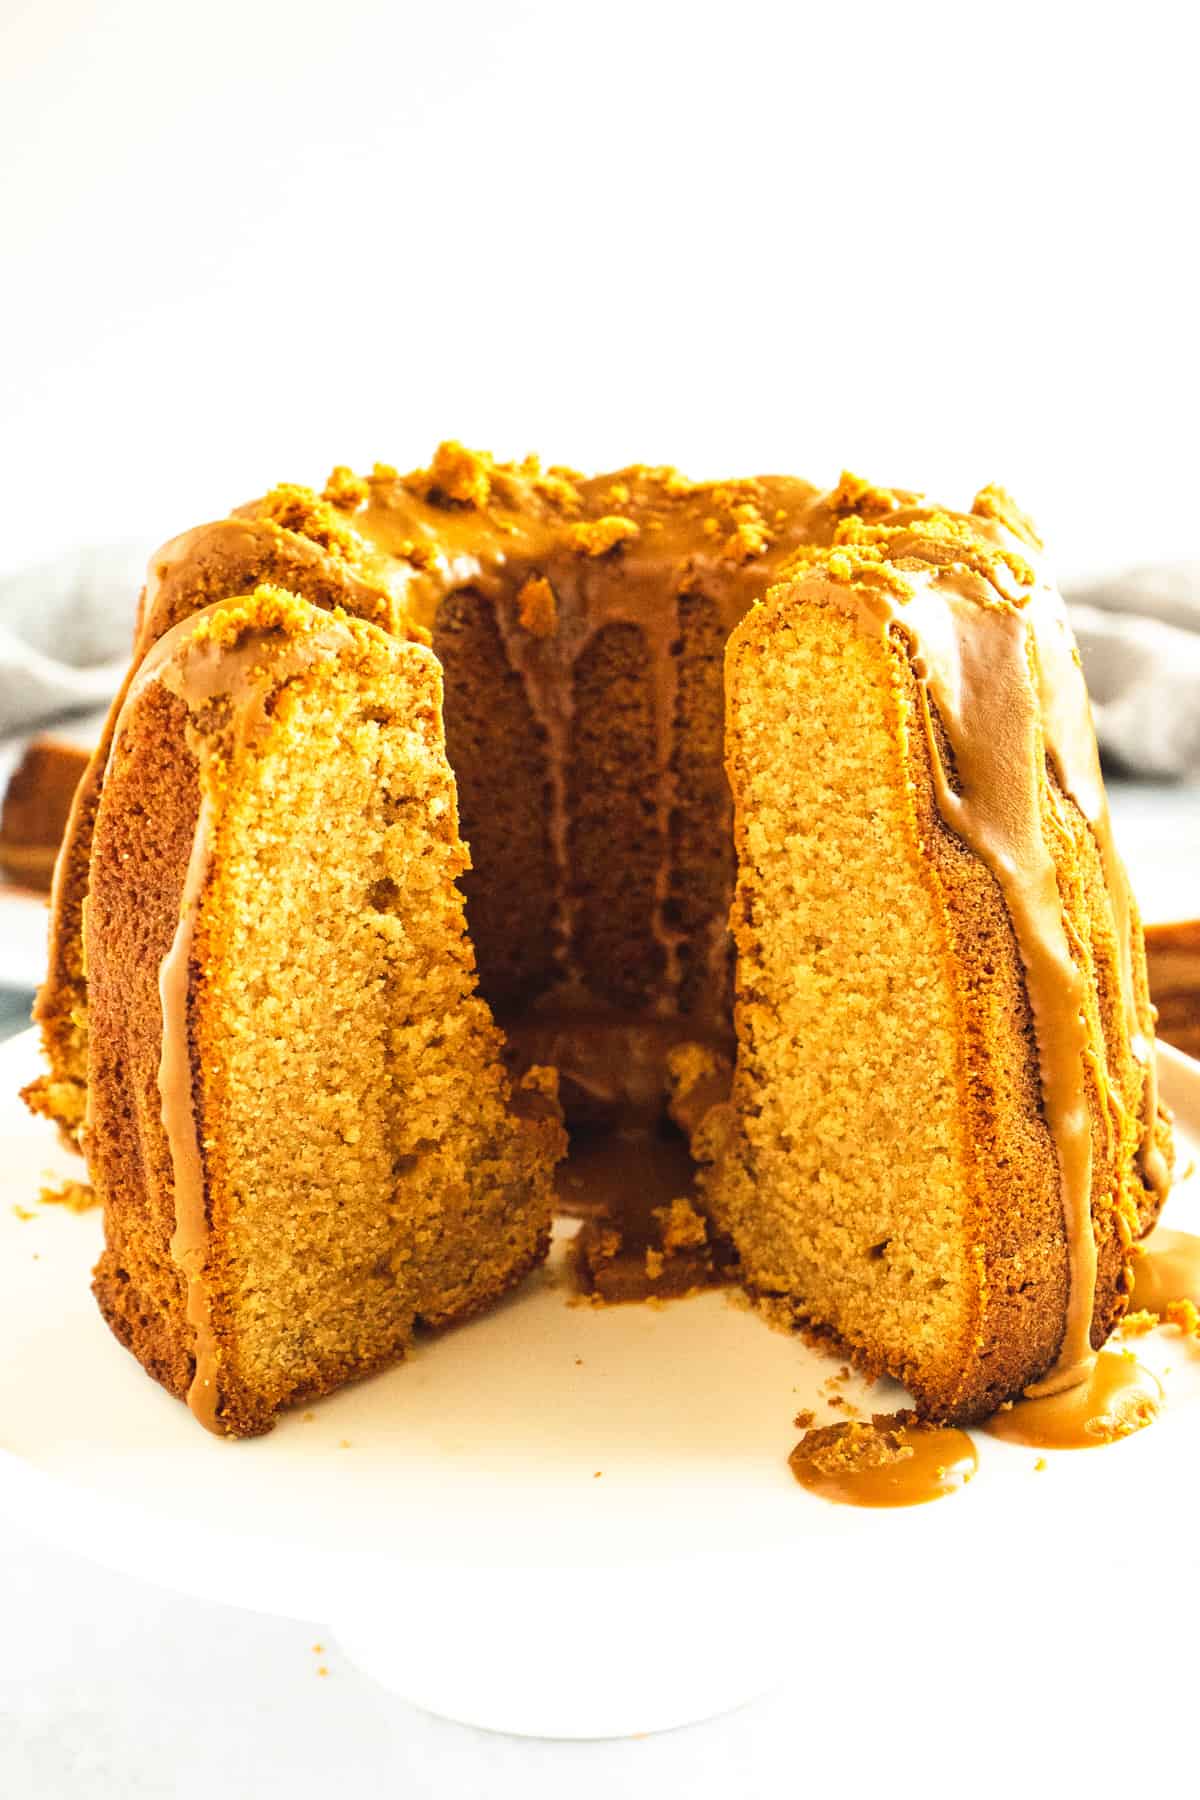 Circular cake drizzled with caramel Biscoff glaze with a slice cut out